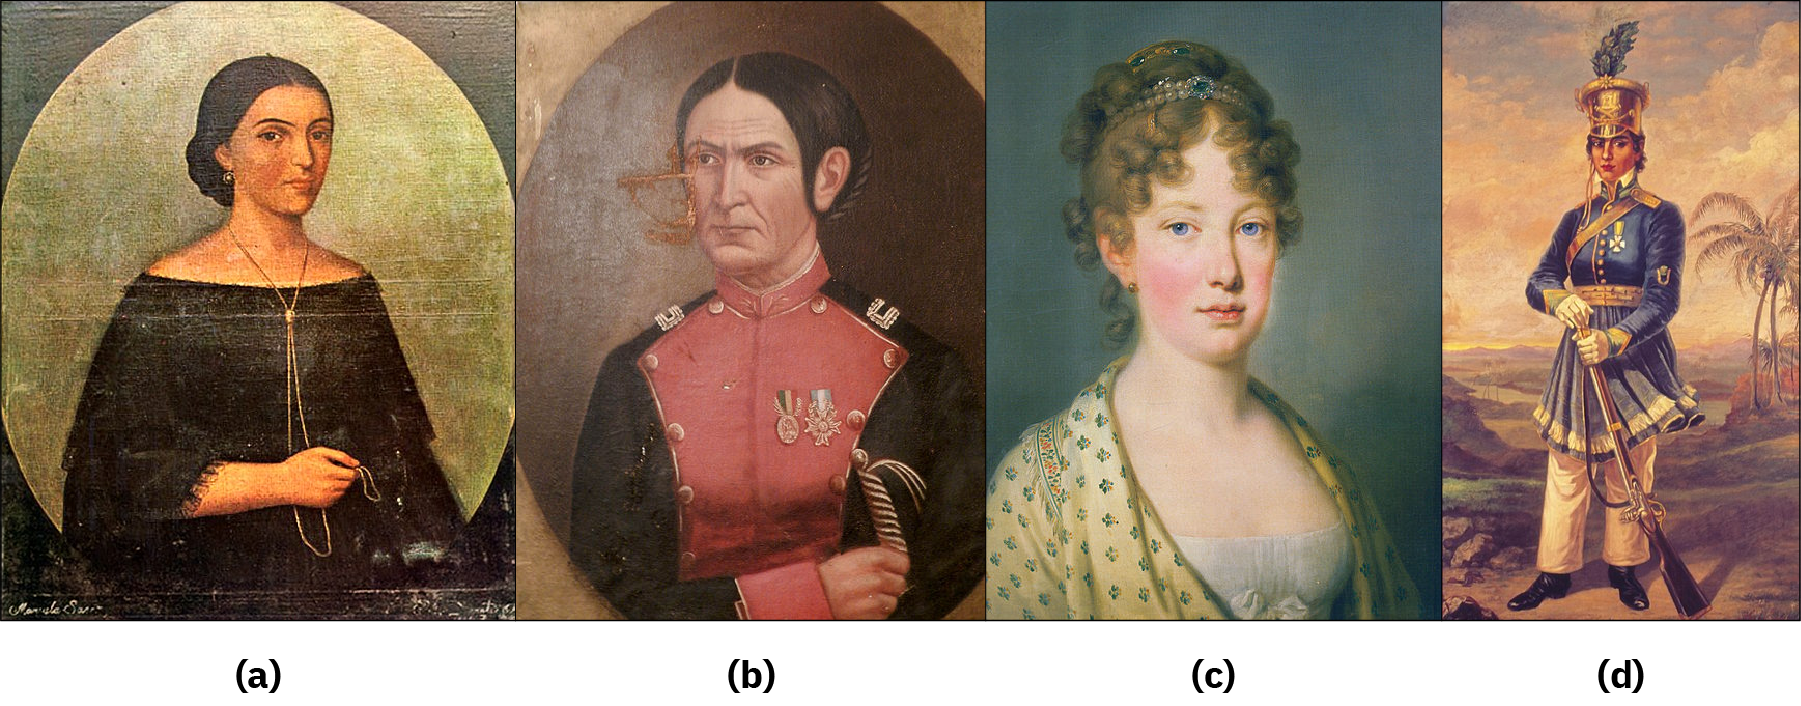 Image (a) is a painting of Manuela Saenz, she wears a black dress and a necklace. Image (b) is a painting of Juana Azurduy de Padilla, she wears a military uniform which is decorated with medals and she holds a sword. Image (c) is a painting of Empress Maria Leopoldina, she wears a dress. Image (d) is a painting of Maria Quitéria, she wears a military uniform and carries a gun.